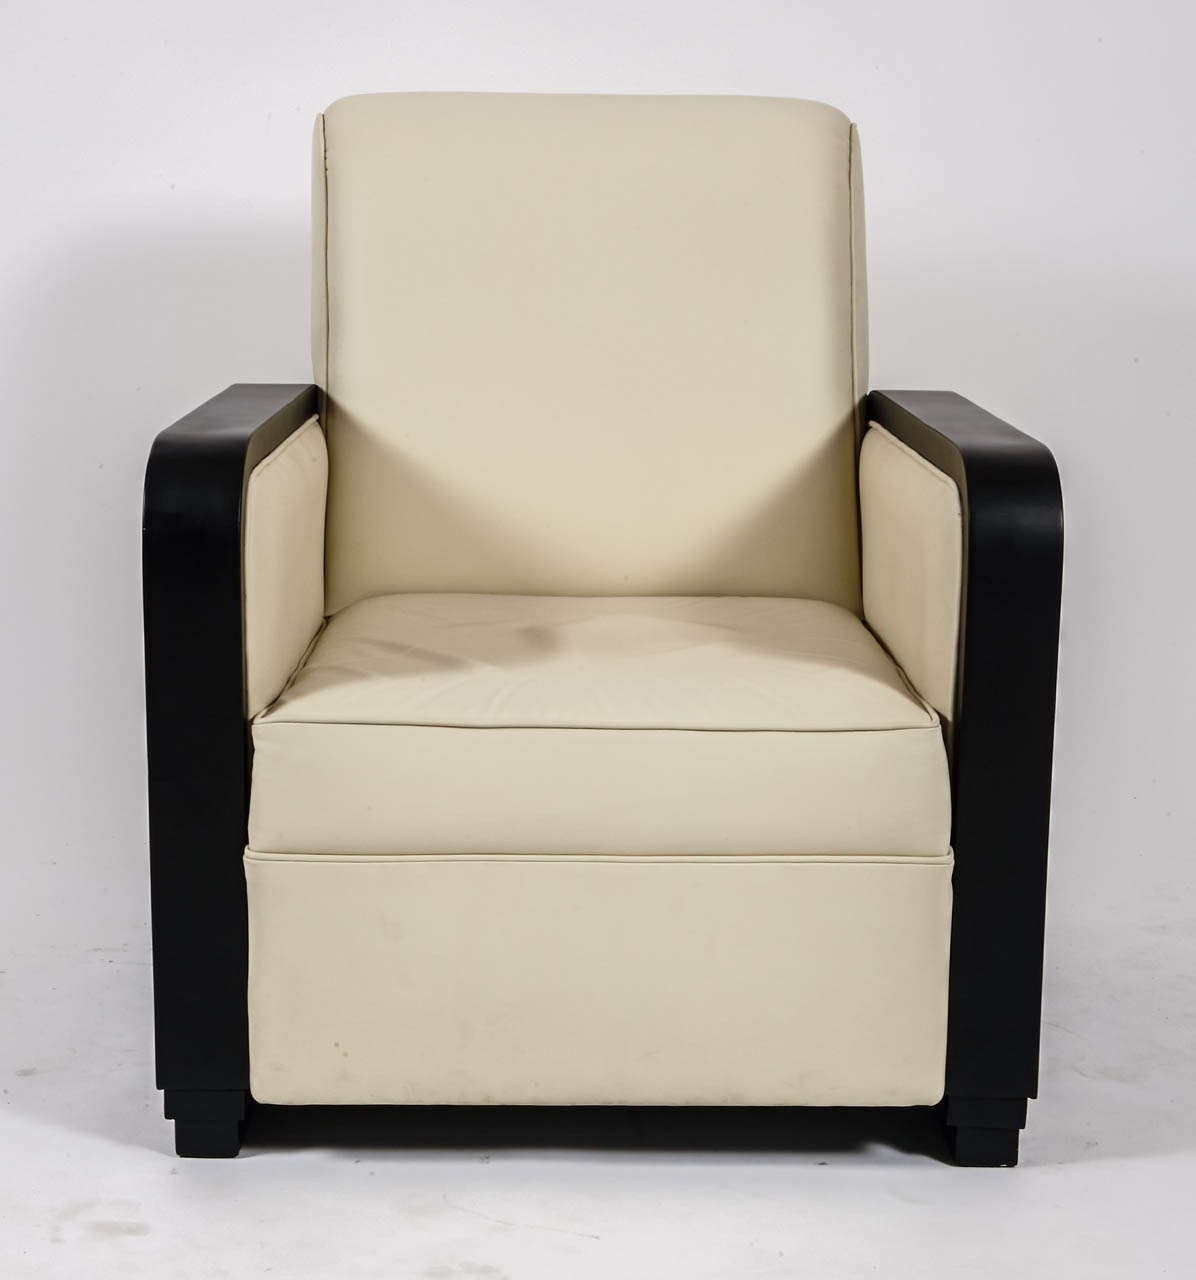 Art Deco armchairs in leather and pear tree blackened.
Entire restored. Very comfortable.